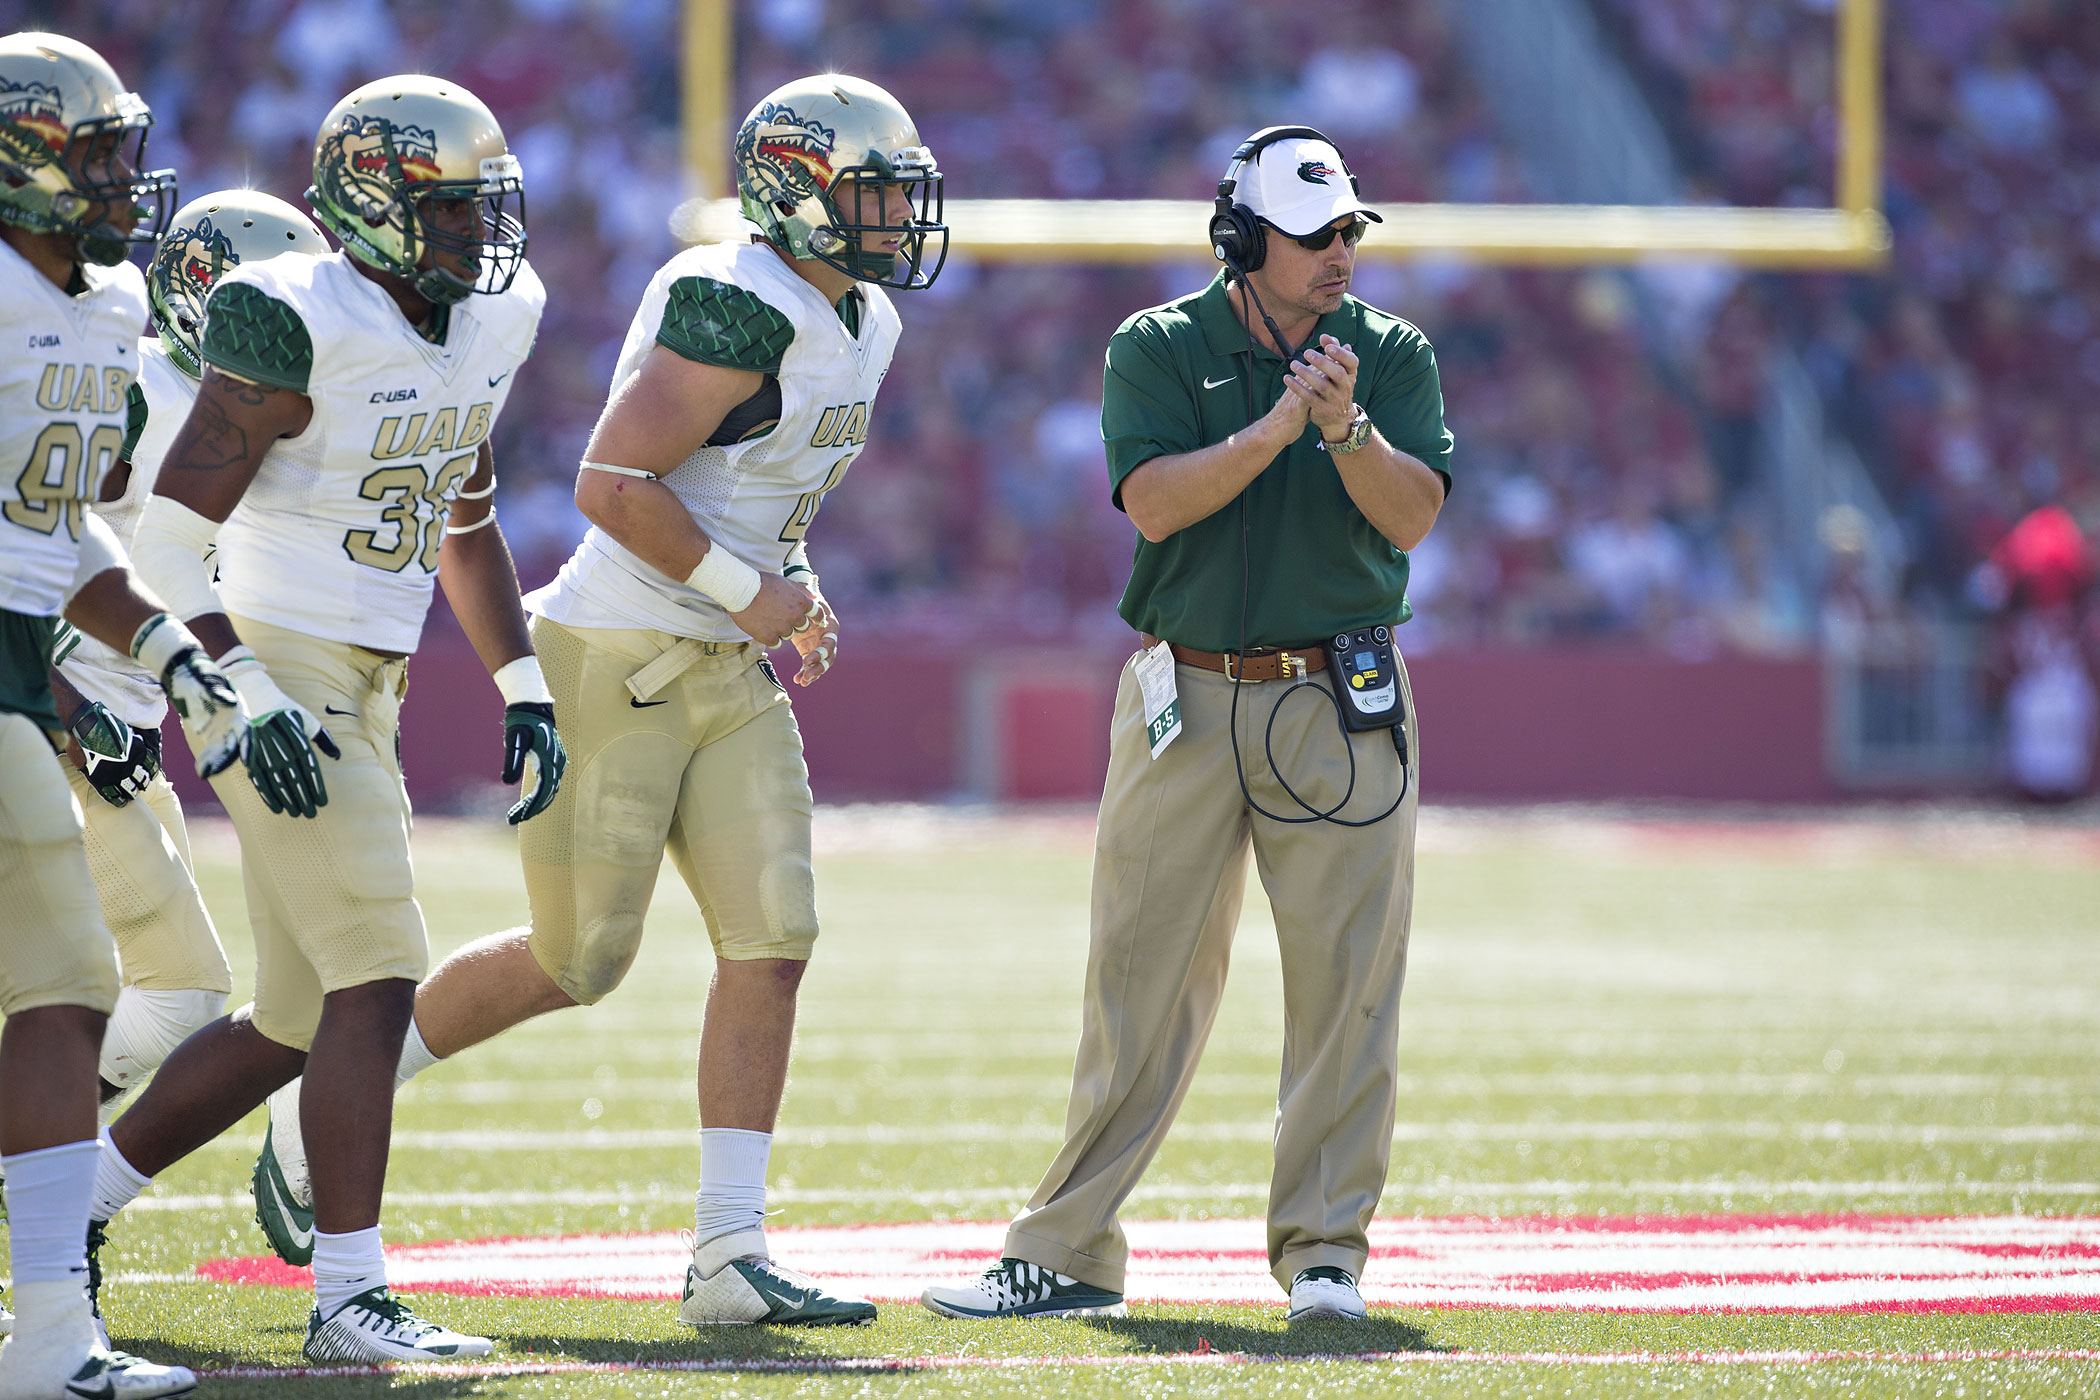 Head Coach Bill Clark of the University of Alabama at Birmingham Blazers is seen with his team during a game against the Arkansas Razorbacks at Razorback Stadium on October 25, 2014 in Fayetteville, Arkansas. (Wesley Hitt—Getty Images)